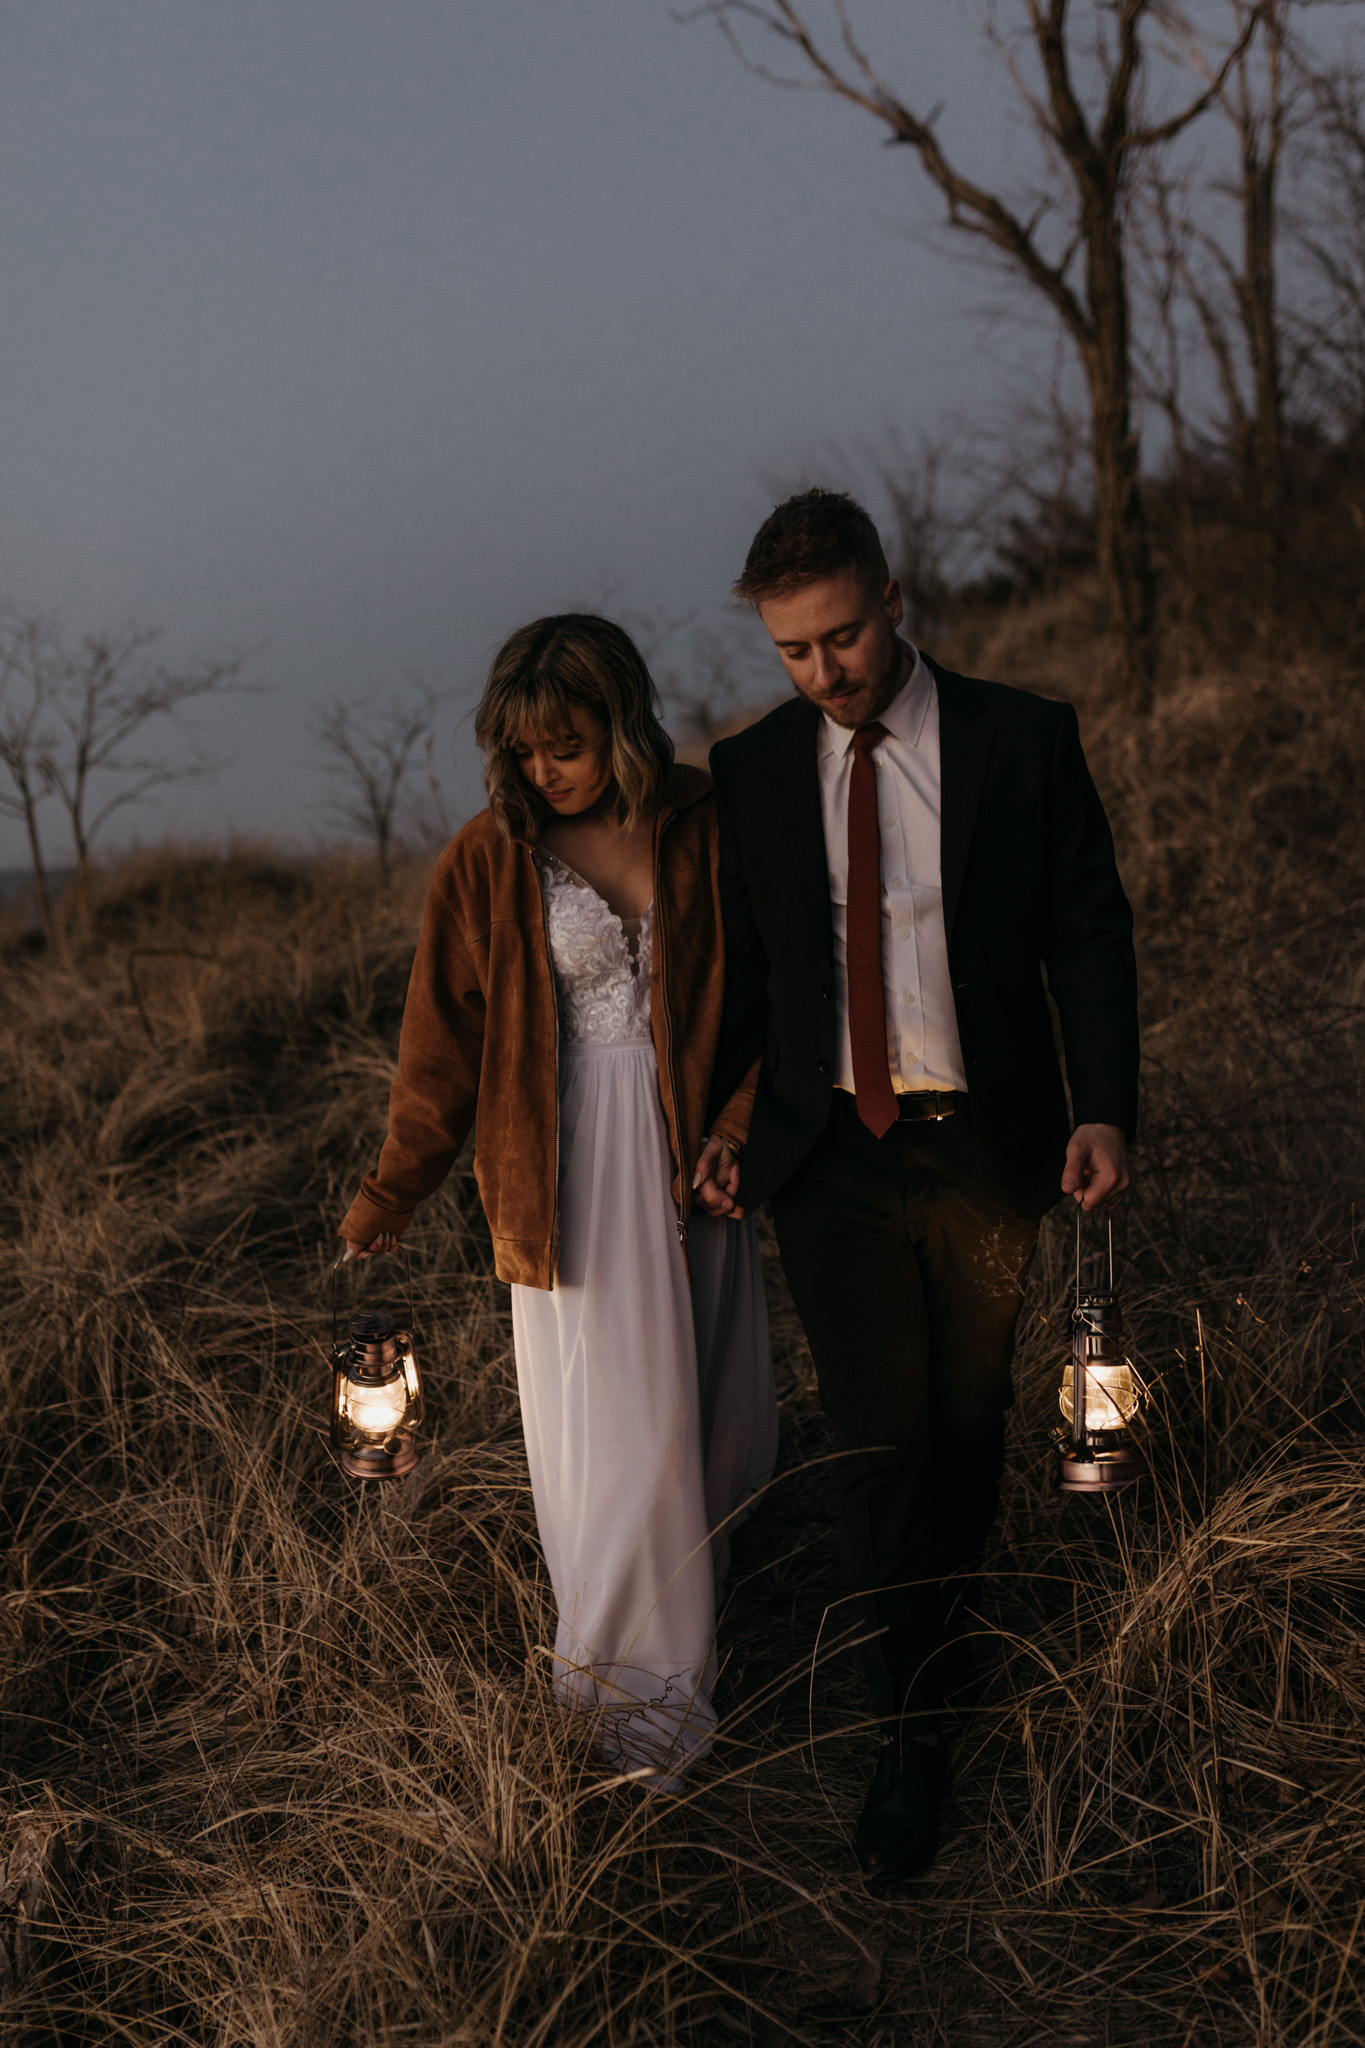 Lantern elopement in the midwest